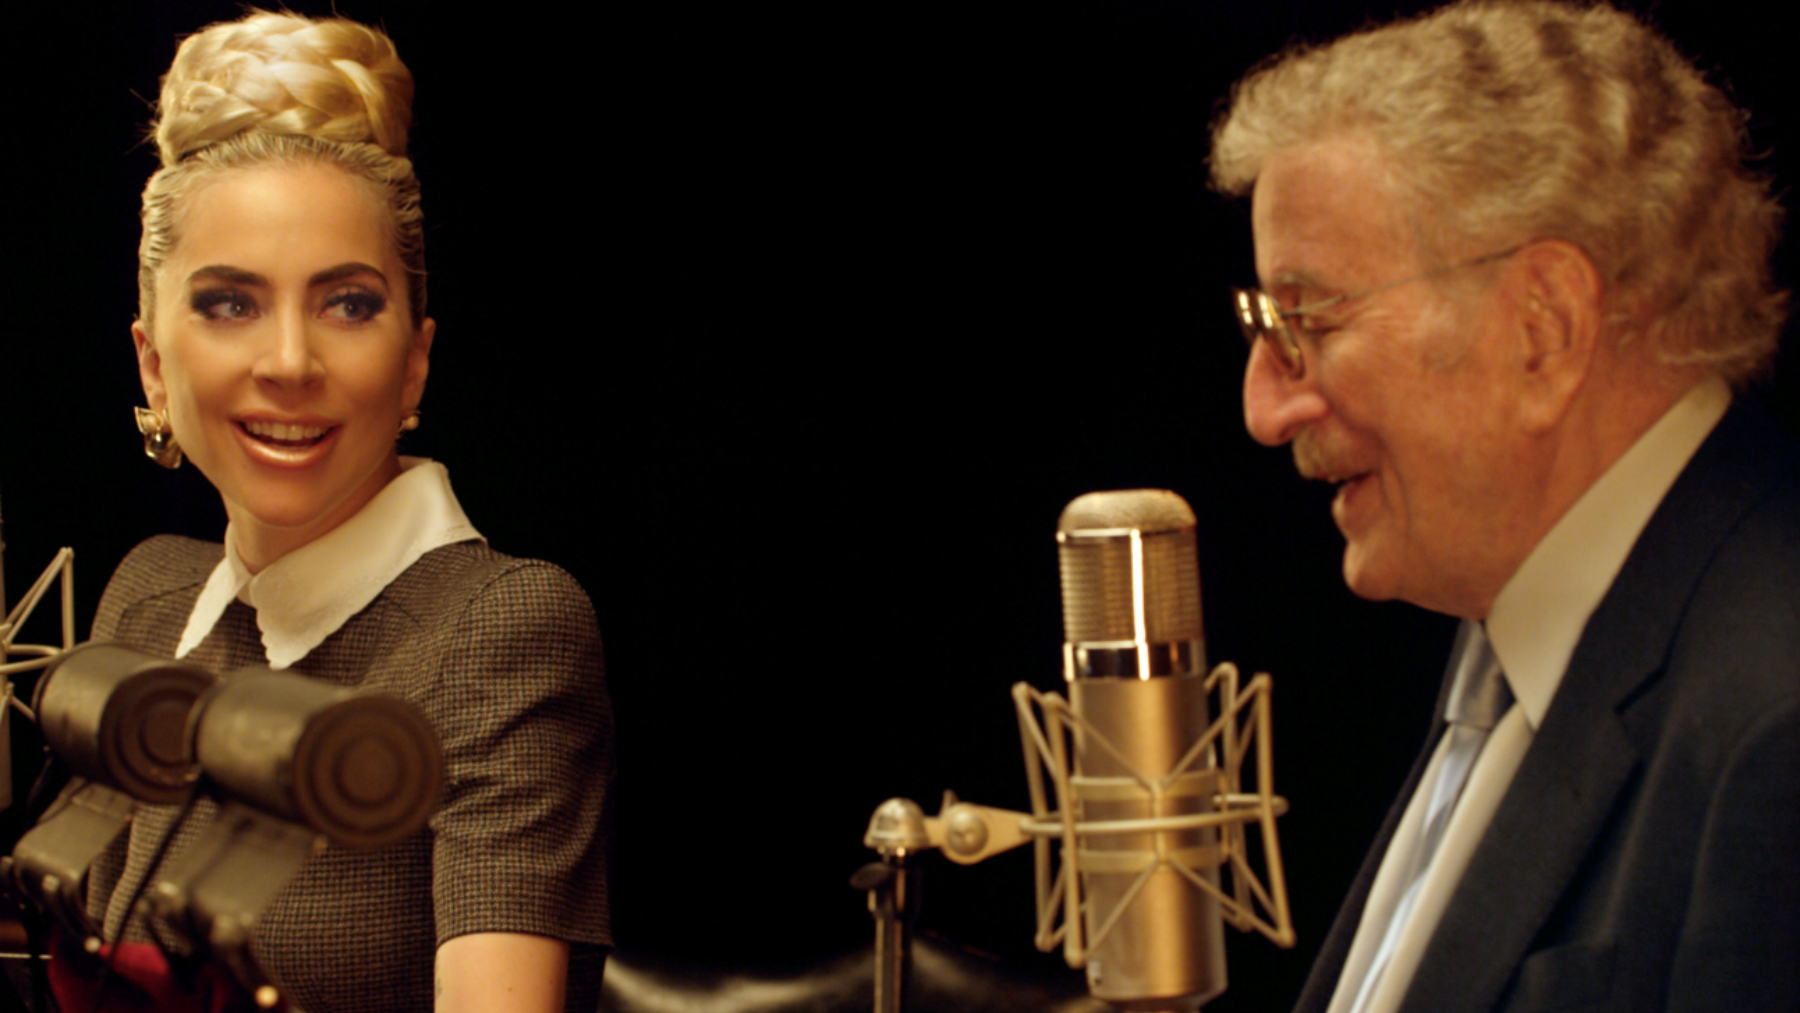 Watch Lady Gaga and Tony Bennett Record ‘Love for Sale’ in New Trailer